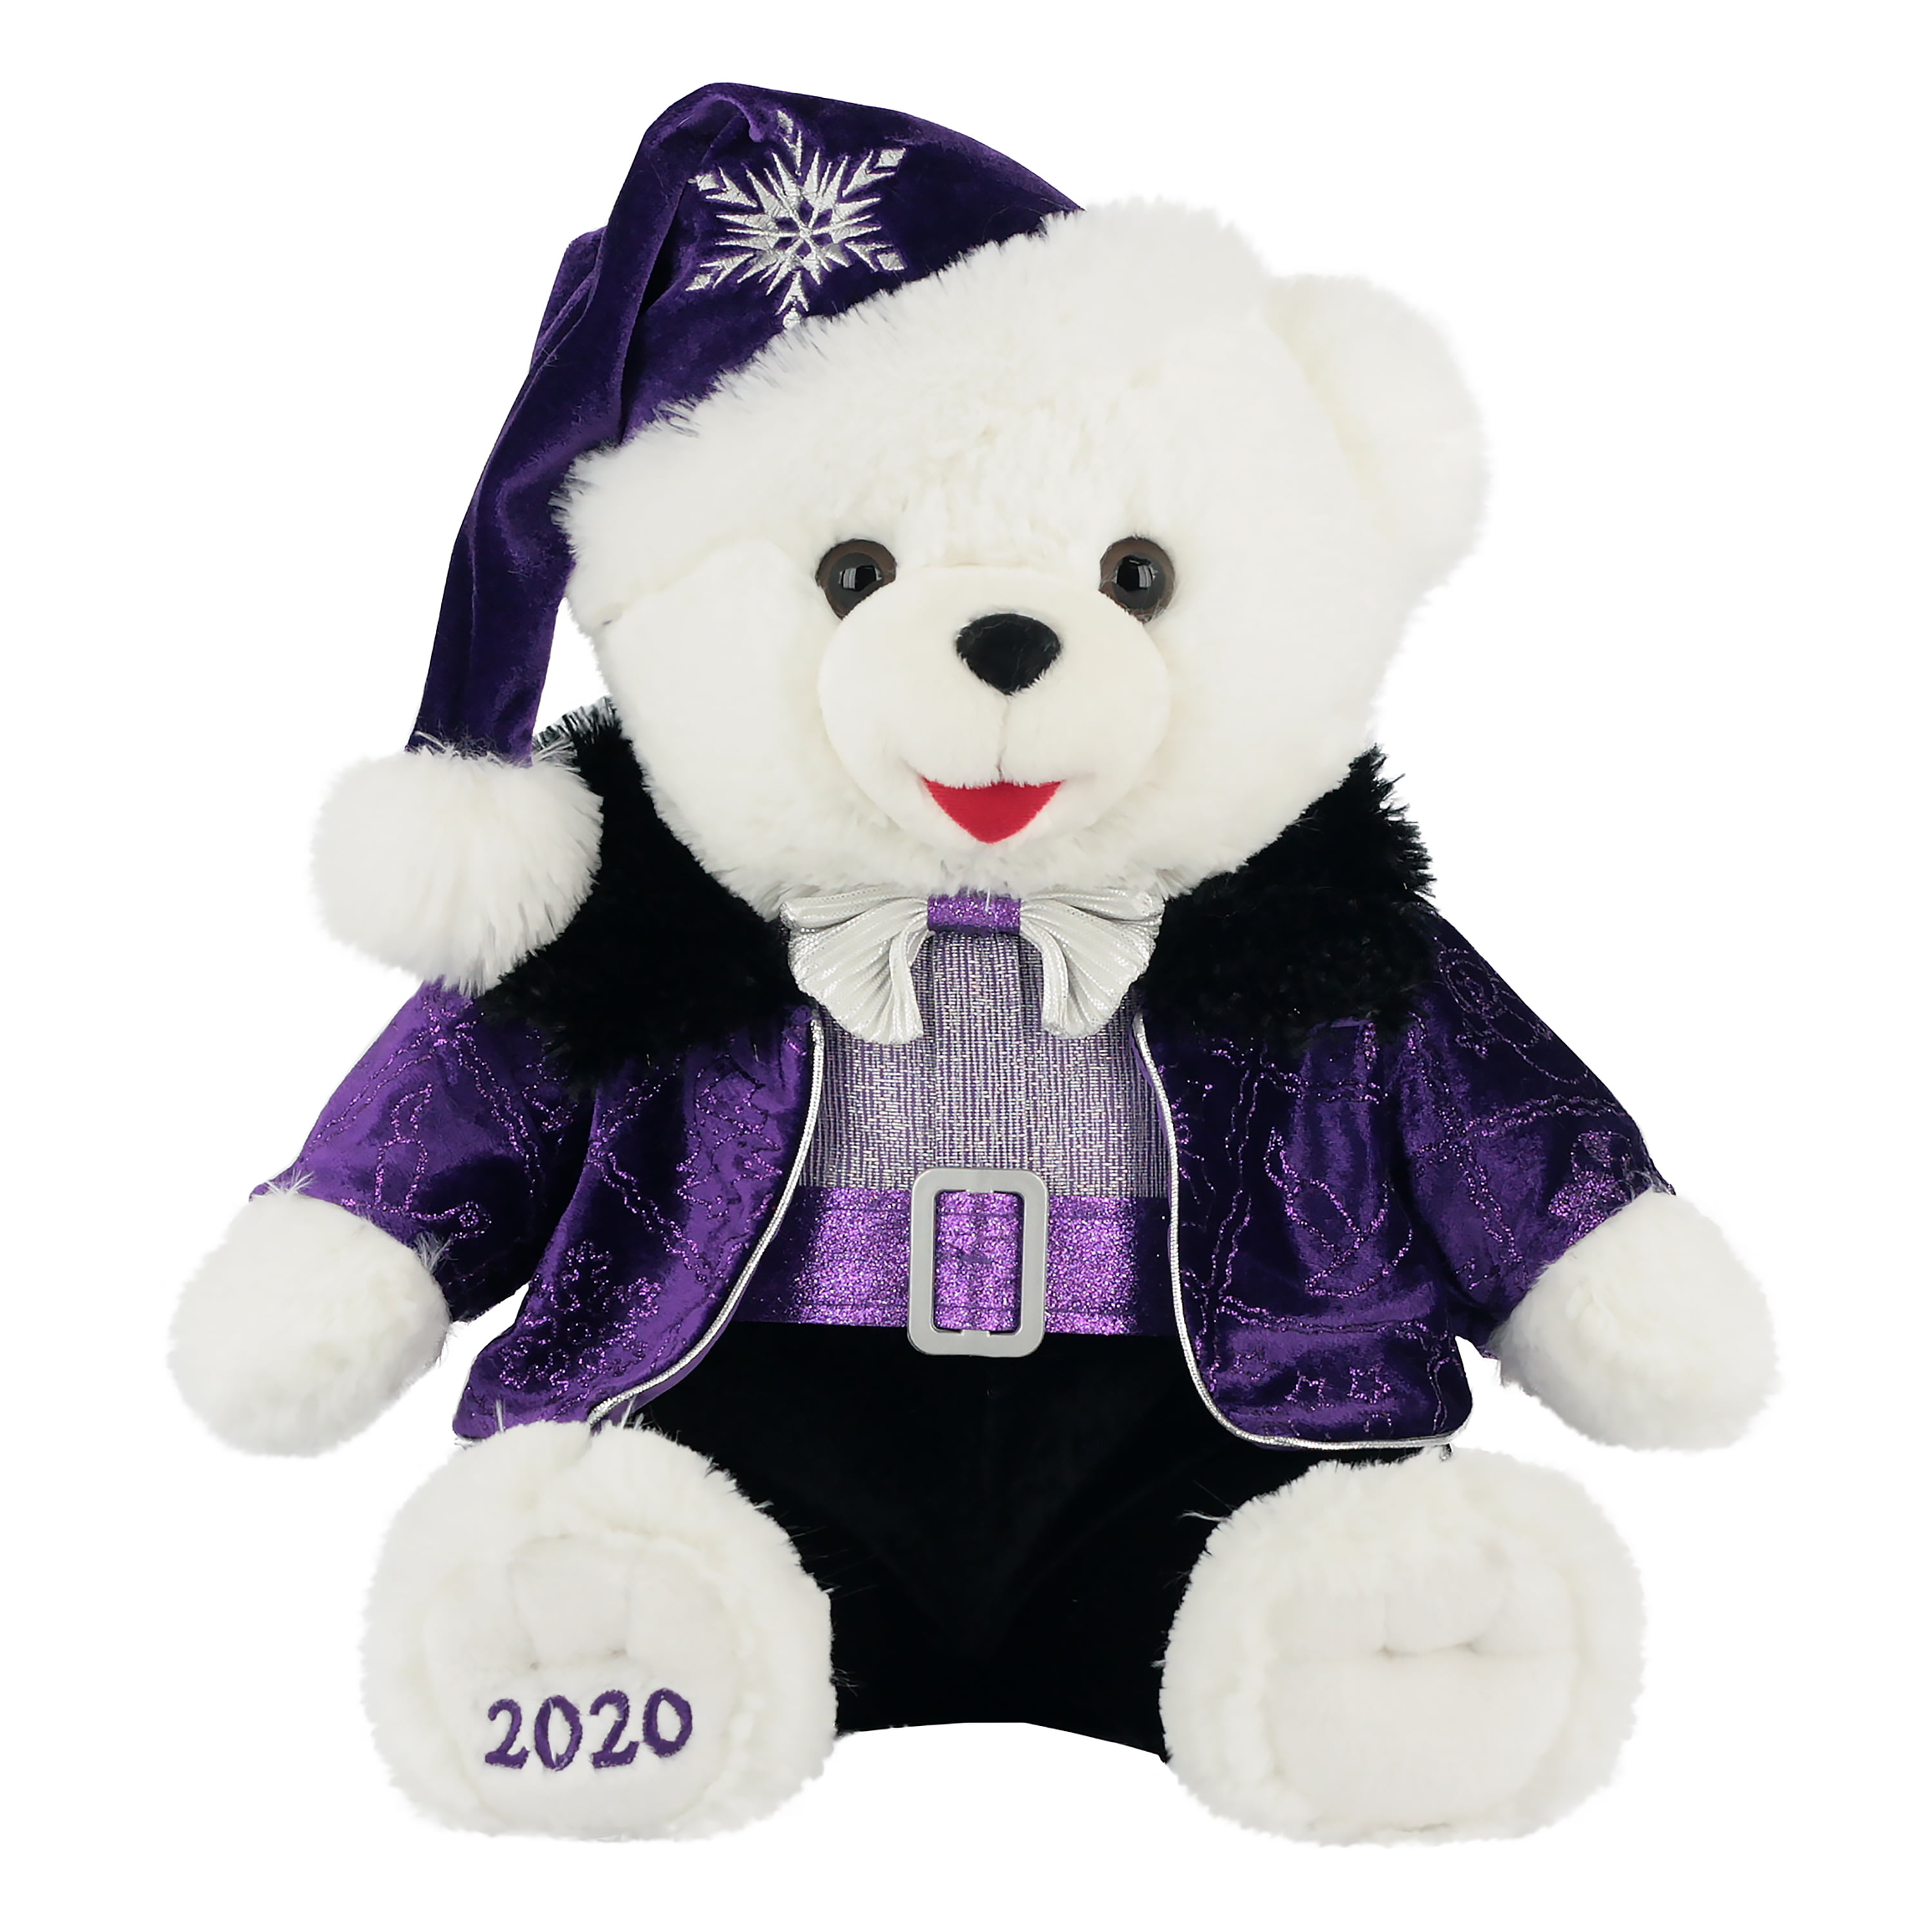 2020 Christmas White with Purple Girl Plush Stuffed Teddy Bear by Holiday Time 